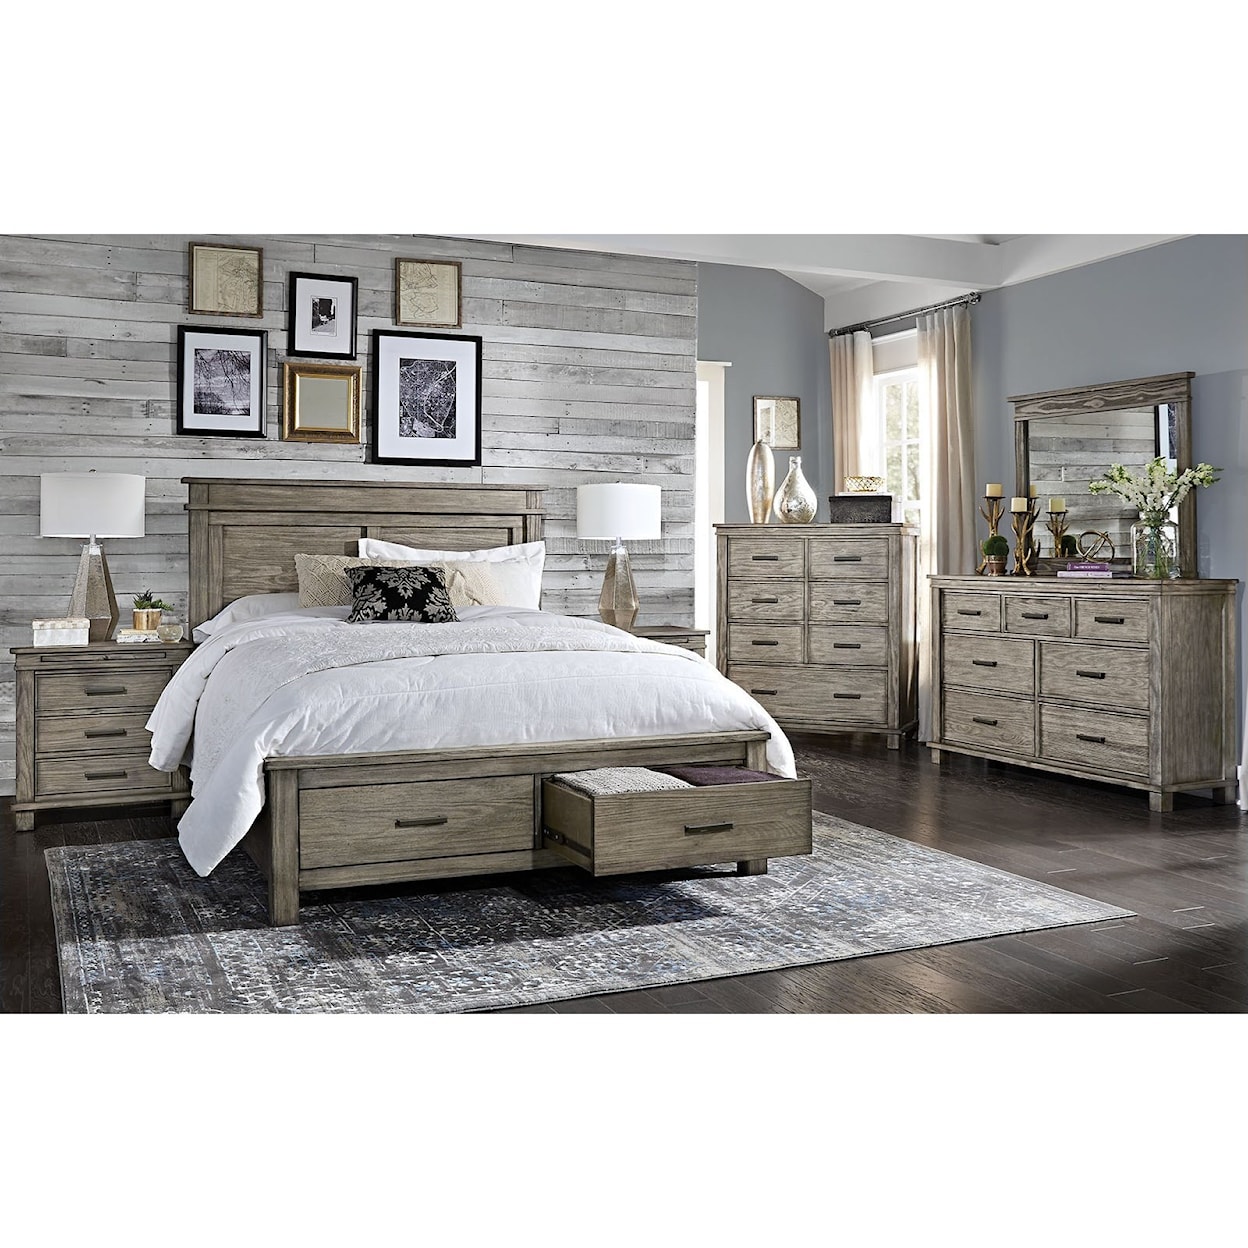 A-A Glacier Point Cal King Storage Bedroom Group